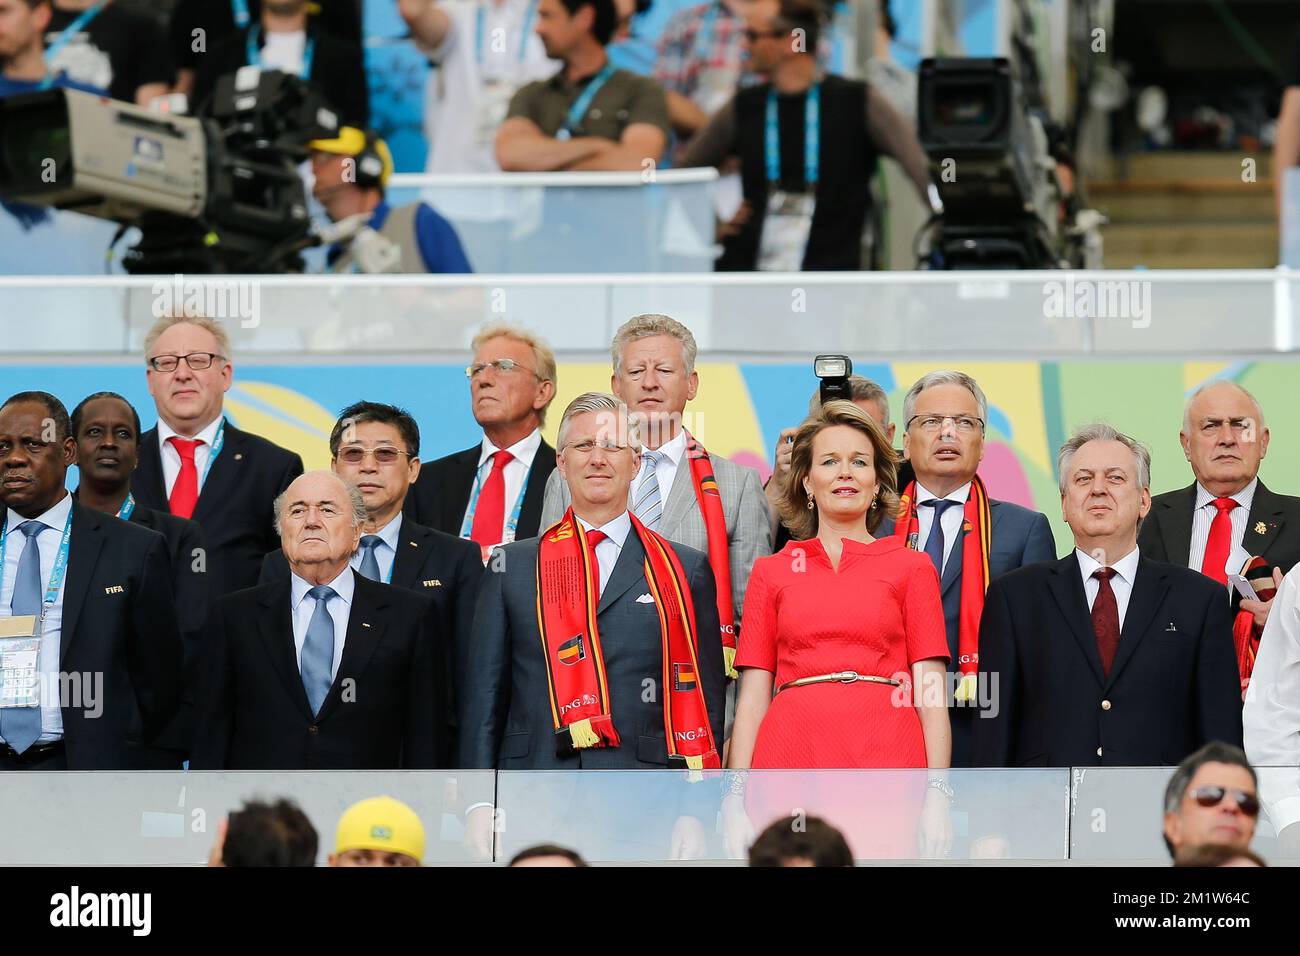 20140622 - RIO DE JANEIRO, BRAZIL: FIFA President Sepp Blatter, King Philippe - Filip of Belgium, Queen Mathilde of Belgium and Outgoing Vice-Minister and Defence Minister Pieter De Crem (C, back)  and Outgoing Vice-Prime Minister and Foreign Minister Didier Reynders (back, 3rd R) stand at a soccer game between Belgian national team The Red Devils and Russia in Rio de Janeiro, Brazil, the second game in Group H of the first round of the 2014 FIFA World Cup, Sunday 22 June 2014. BELGA PHOTO BRUNO FAHY Stock Photo